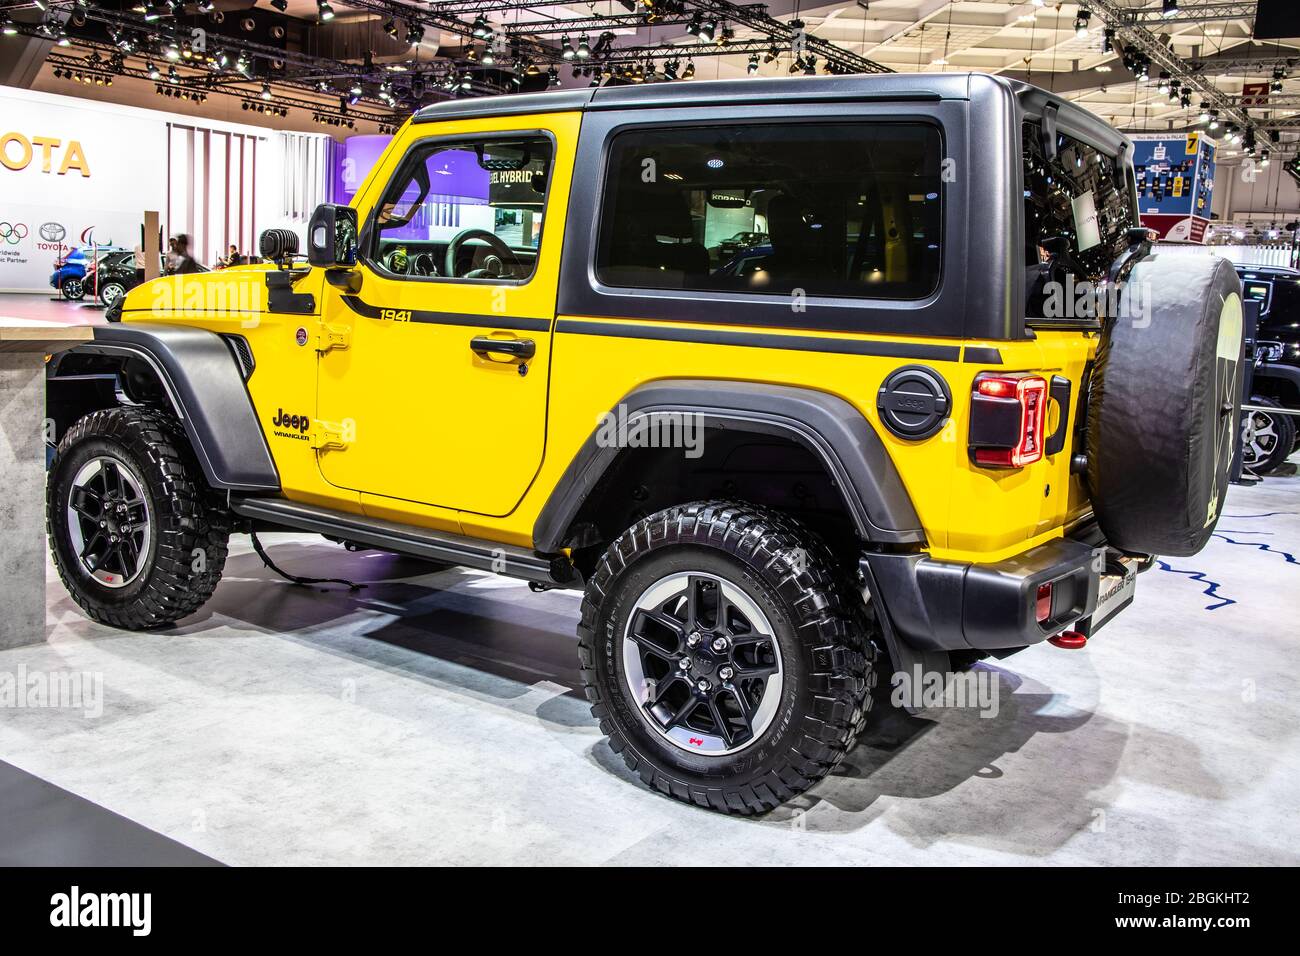 Brussels, Belgium, Jan 2020 Jeep Wrangler 1941 edition, Brussels Motor  Show, fourth generation, JL, four-wheel drive off-road Jeep vehicle Stock  Photo - Alamy